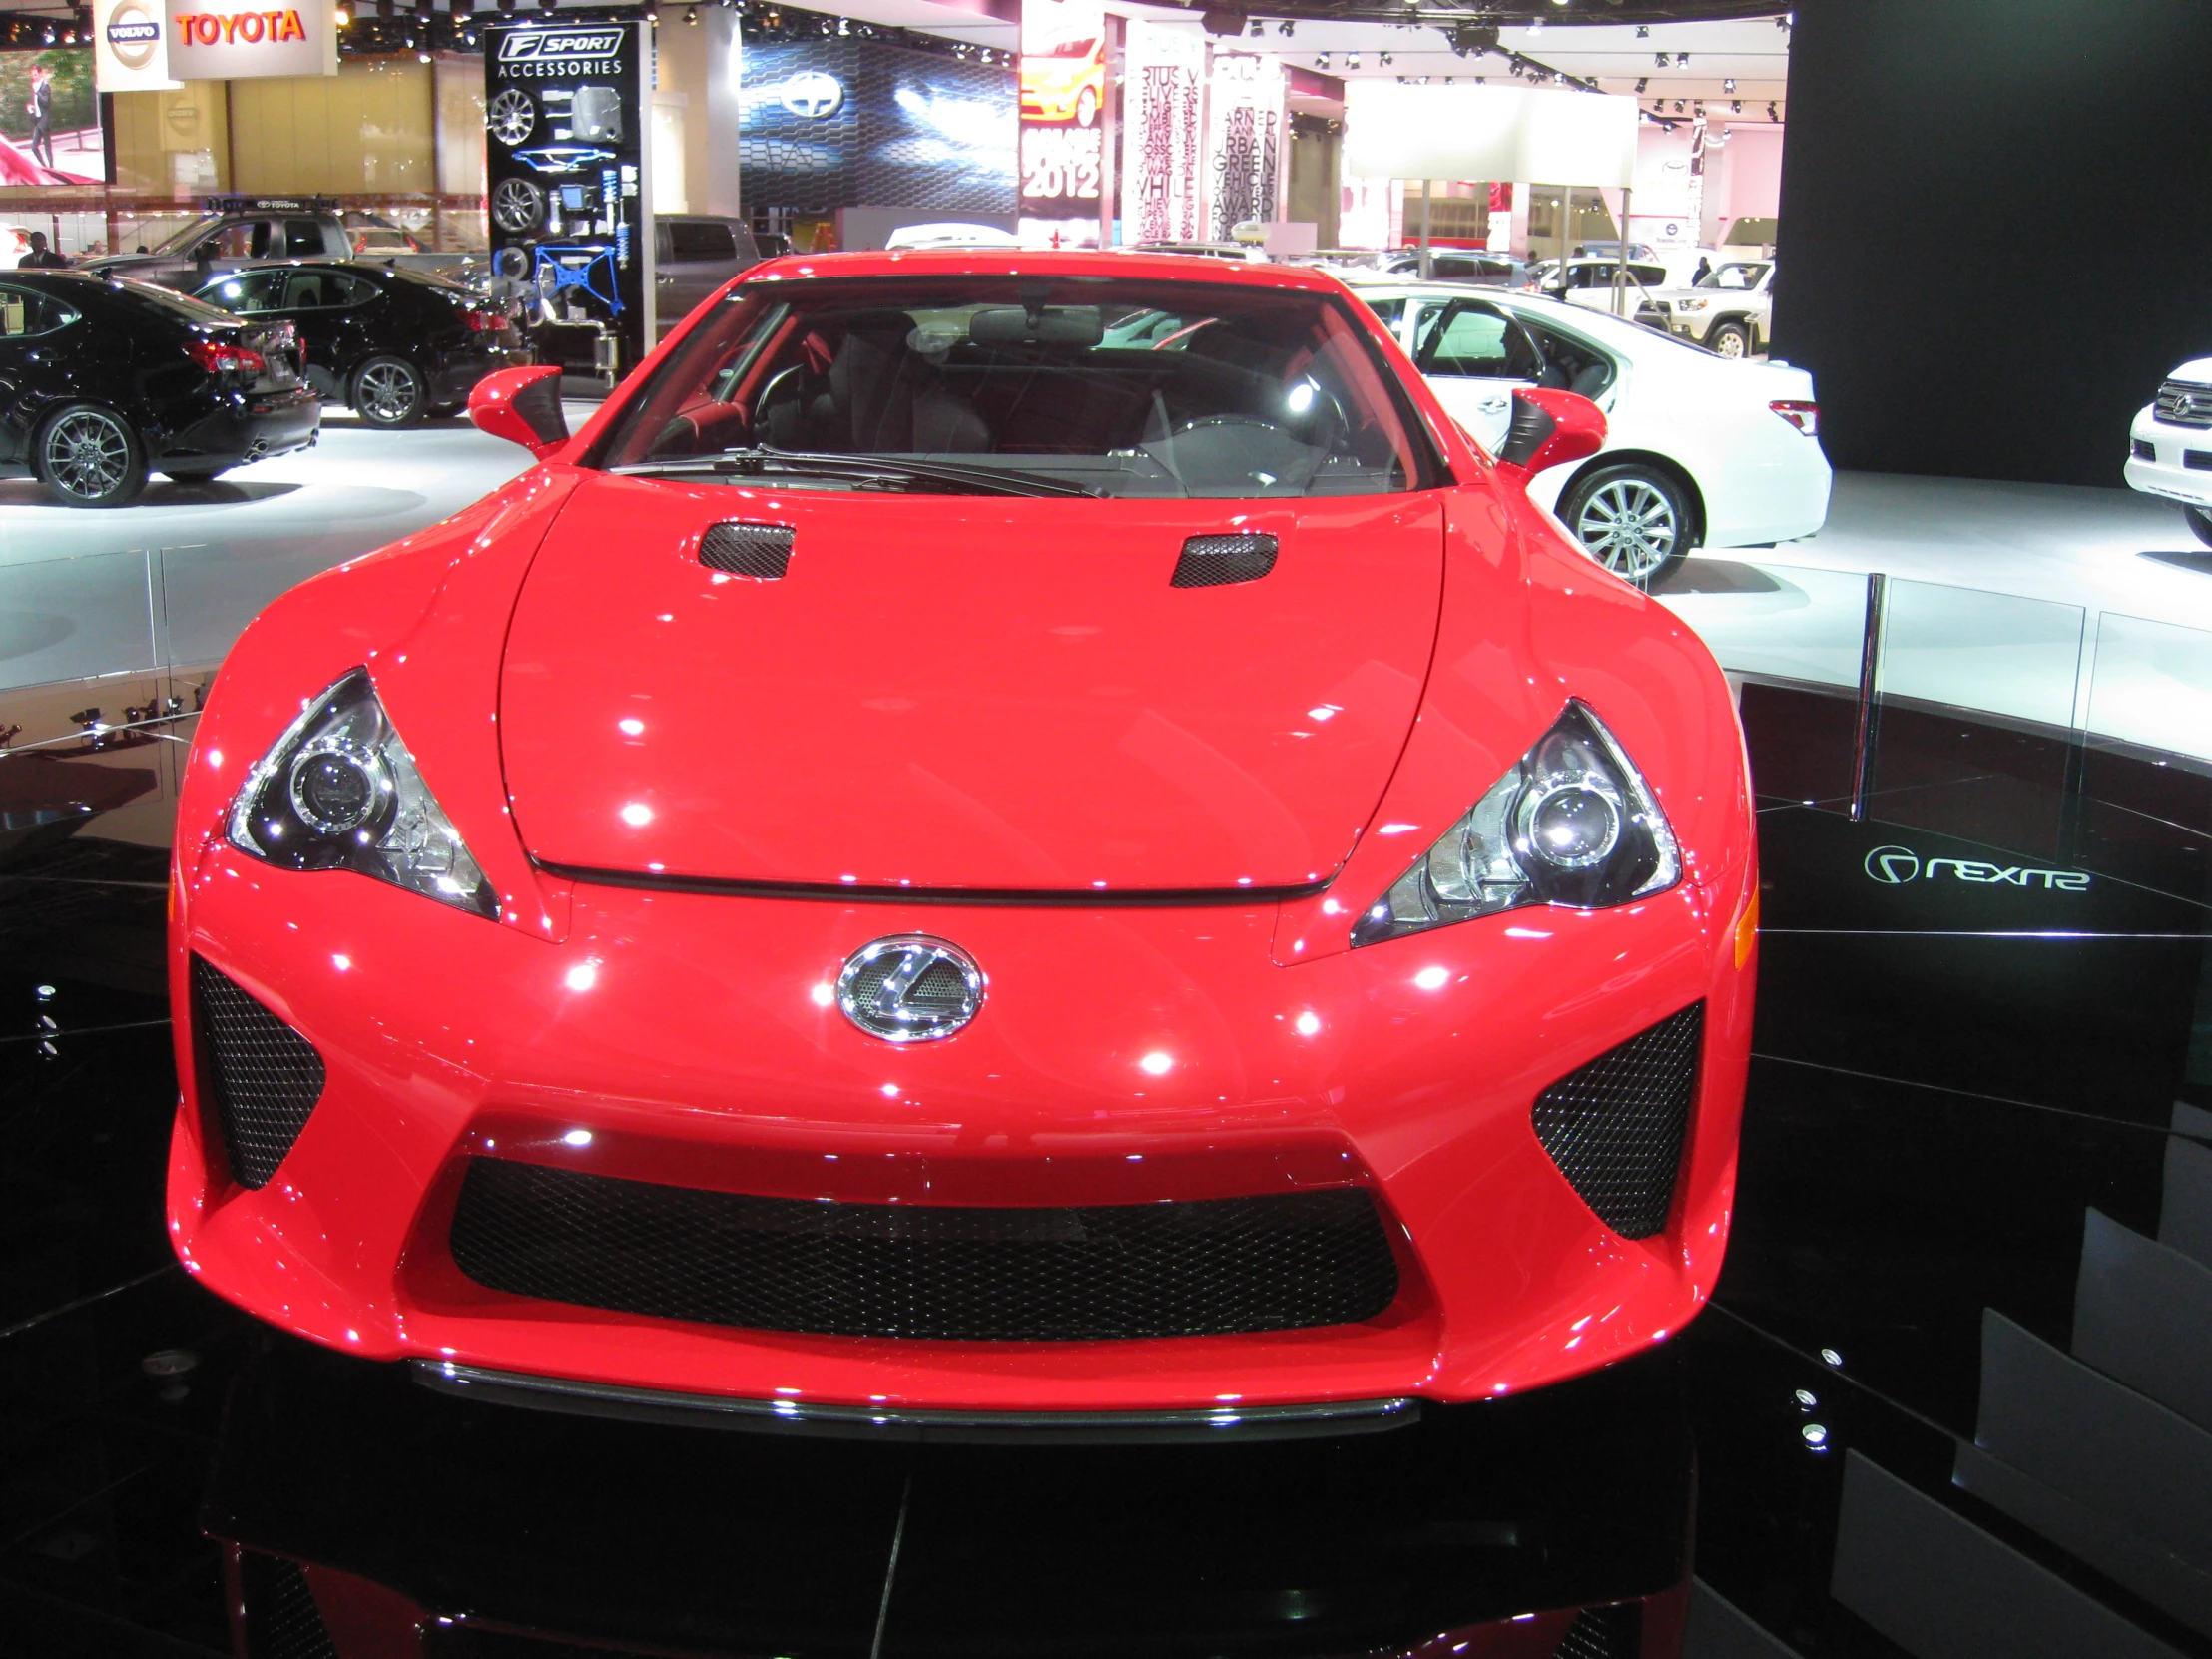 a red car is on display on the show floor